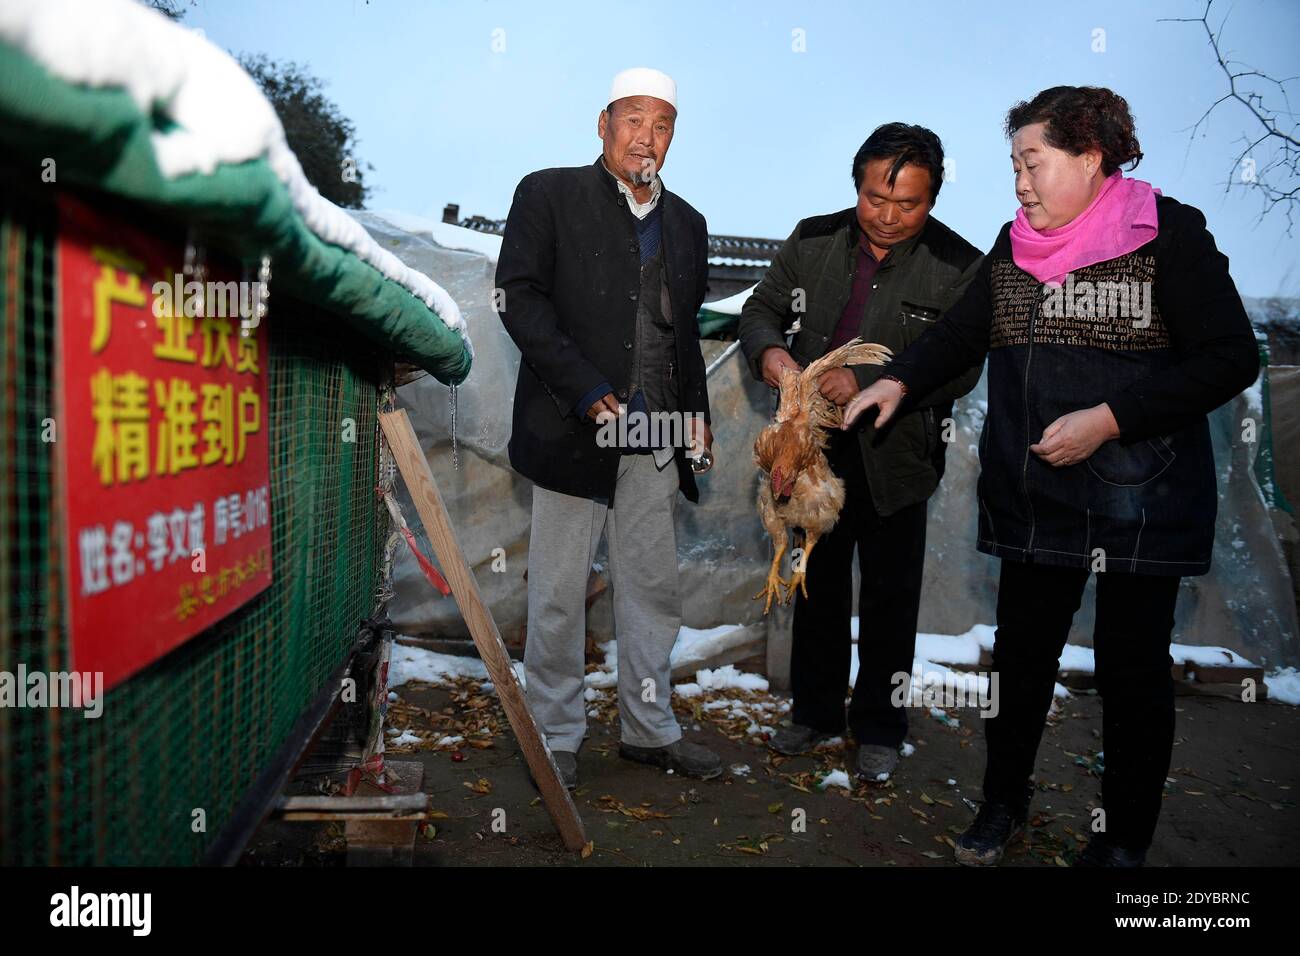 (201225) -- YINCHUAN, Dec. 25, 2020 (Xinhua) -- Ding Haiyan (R) visits villagers to learn about their livestock breeding in Hejiayuan Village of Xihaigu in northwest China's Ningxia Hui Autonomous Region, Oct. 27, 2016. Xihaigu, a largely mountainous region in northwest Ningxia, was once inflicted by deep poverty and labeled the 'most unfit place for human settlement' by the United Nations in the 1970s due to land reclamation, drought, and a fragile ecological environment. On Nov. 16, 2020, Xihaigu historically bid farewell to absolute poverty, during which 'she power' played an indispensable Stock Photo